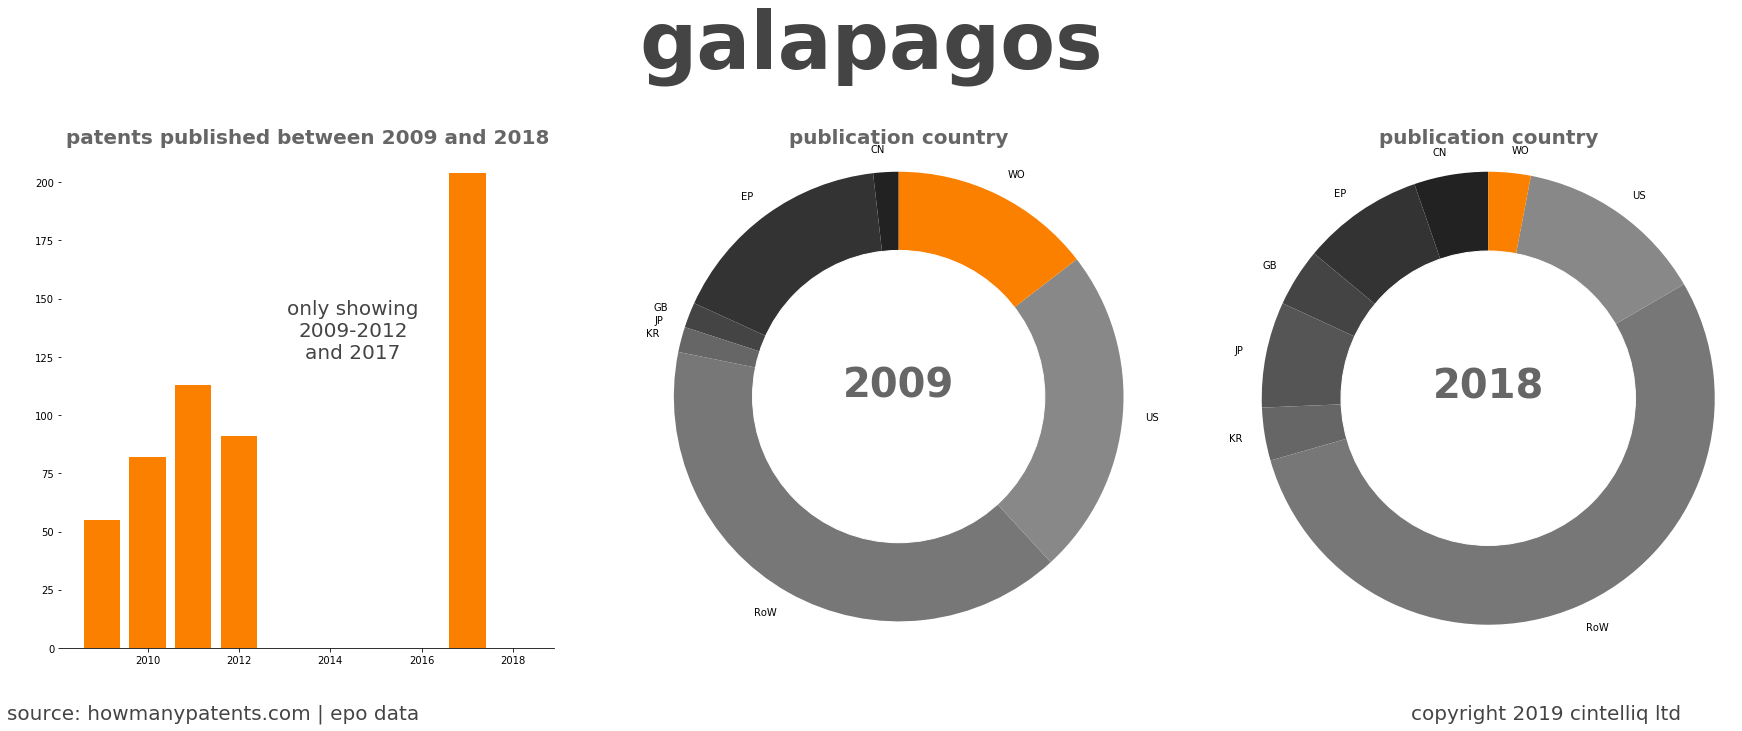 summary of patents for Galapagos